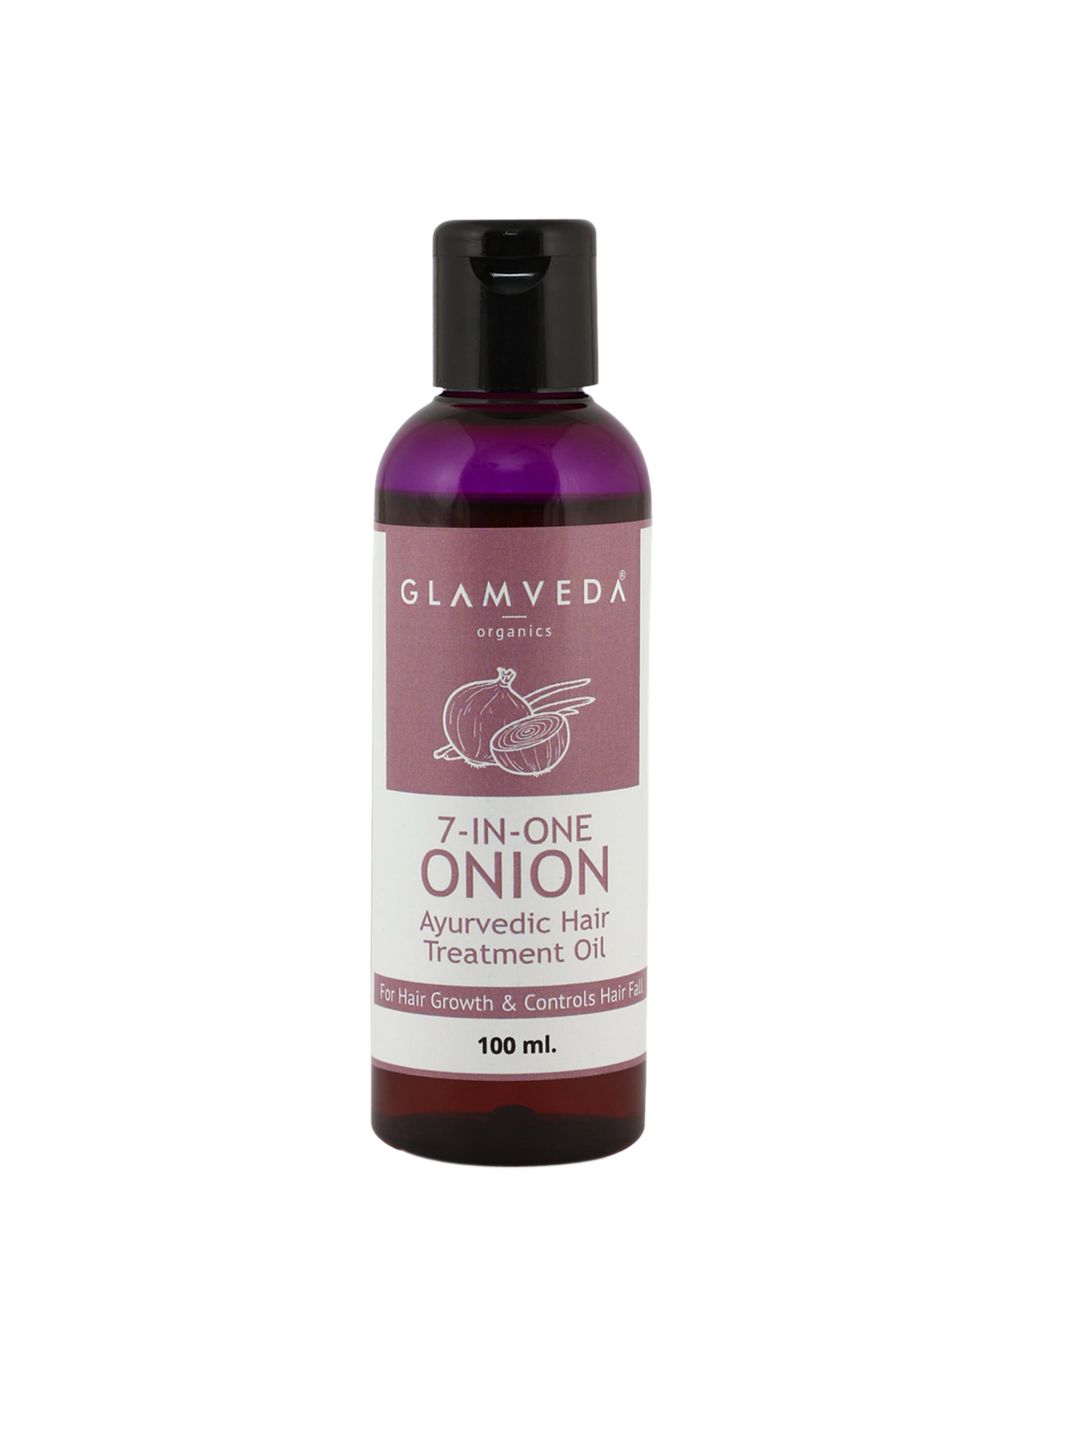 Glamveda 7 In One Onion Ayurvedic Hair Treatment Oil Price in India